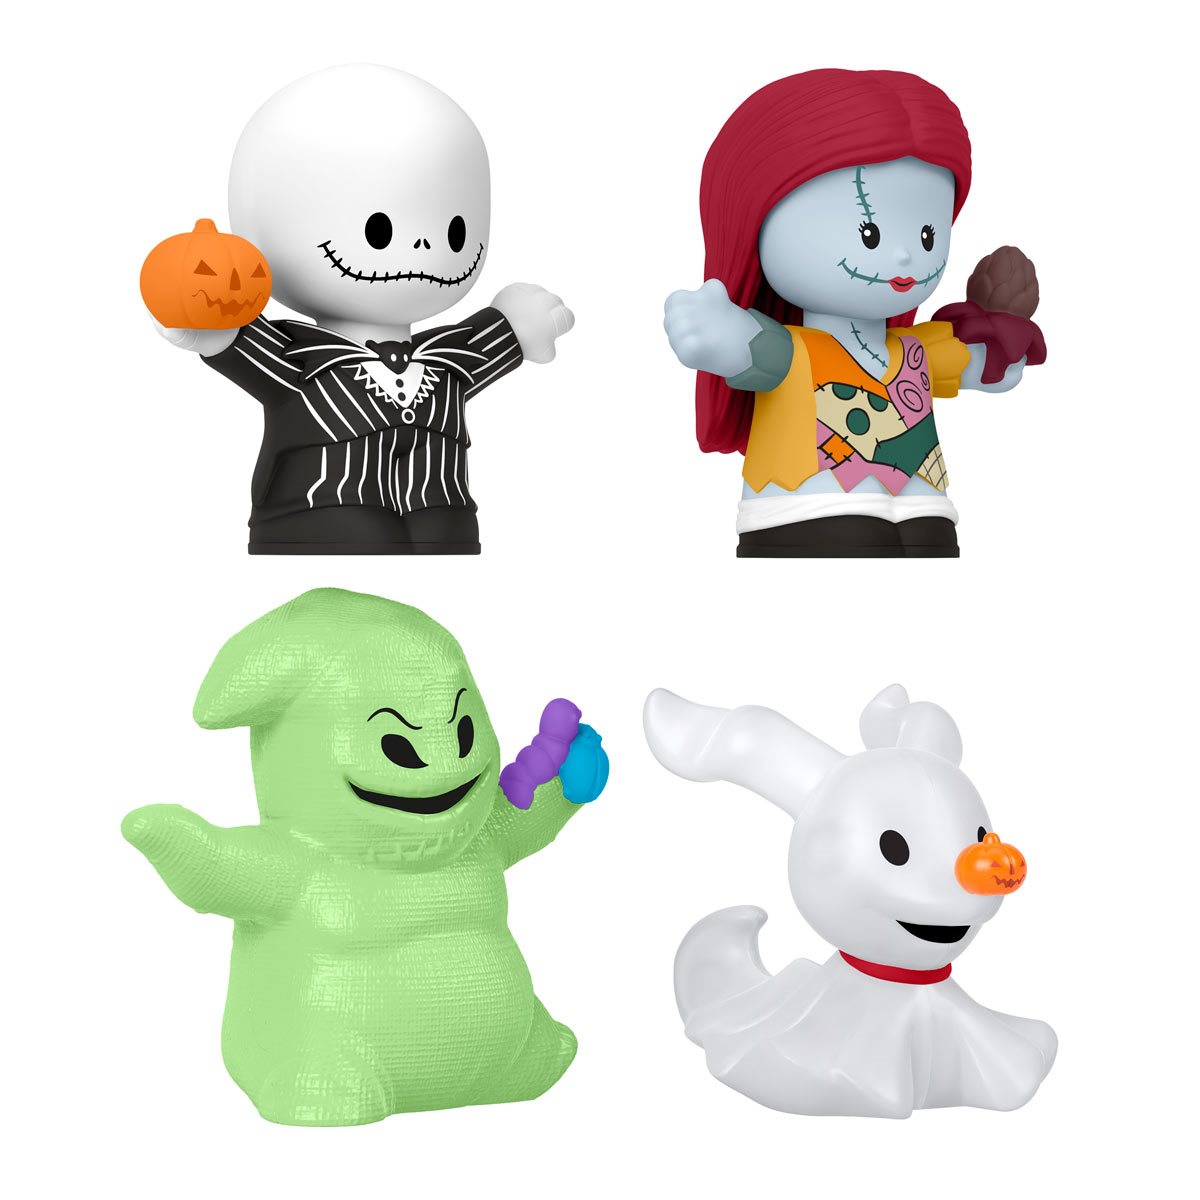 Live - Nightmare Before Christmas Little People Collector Set